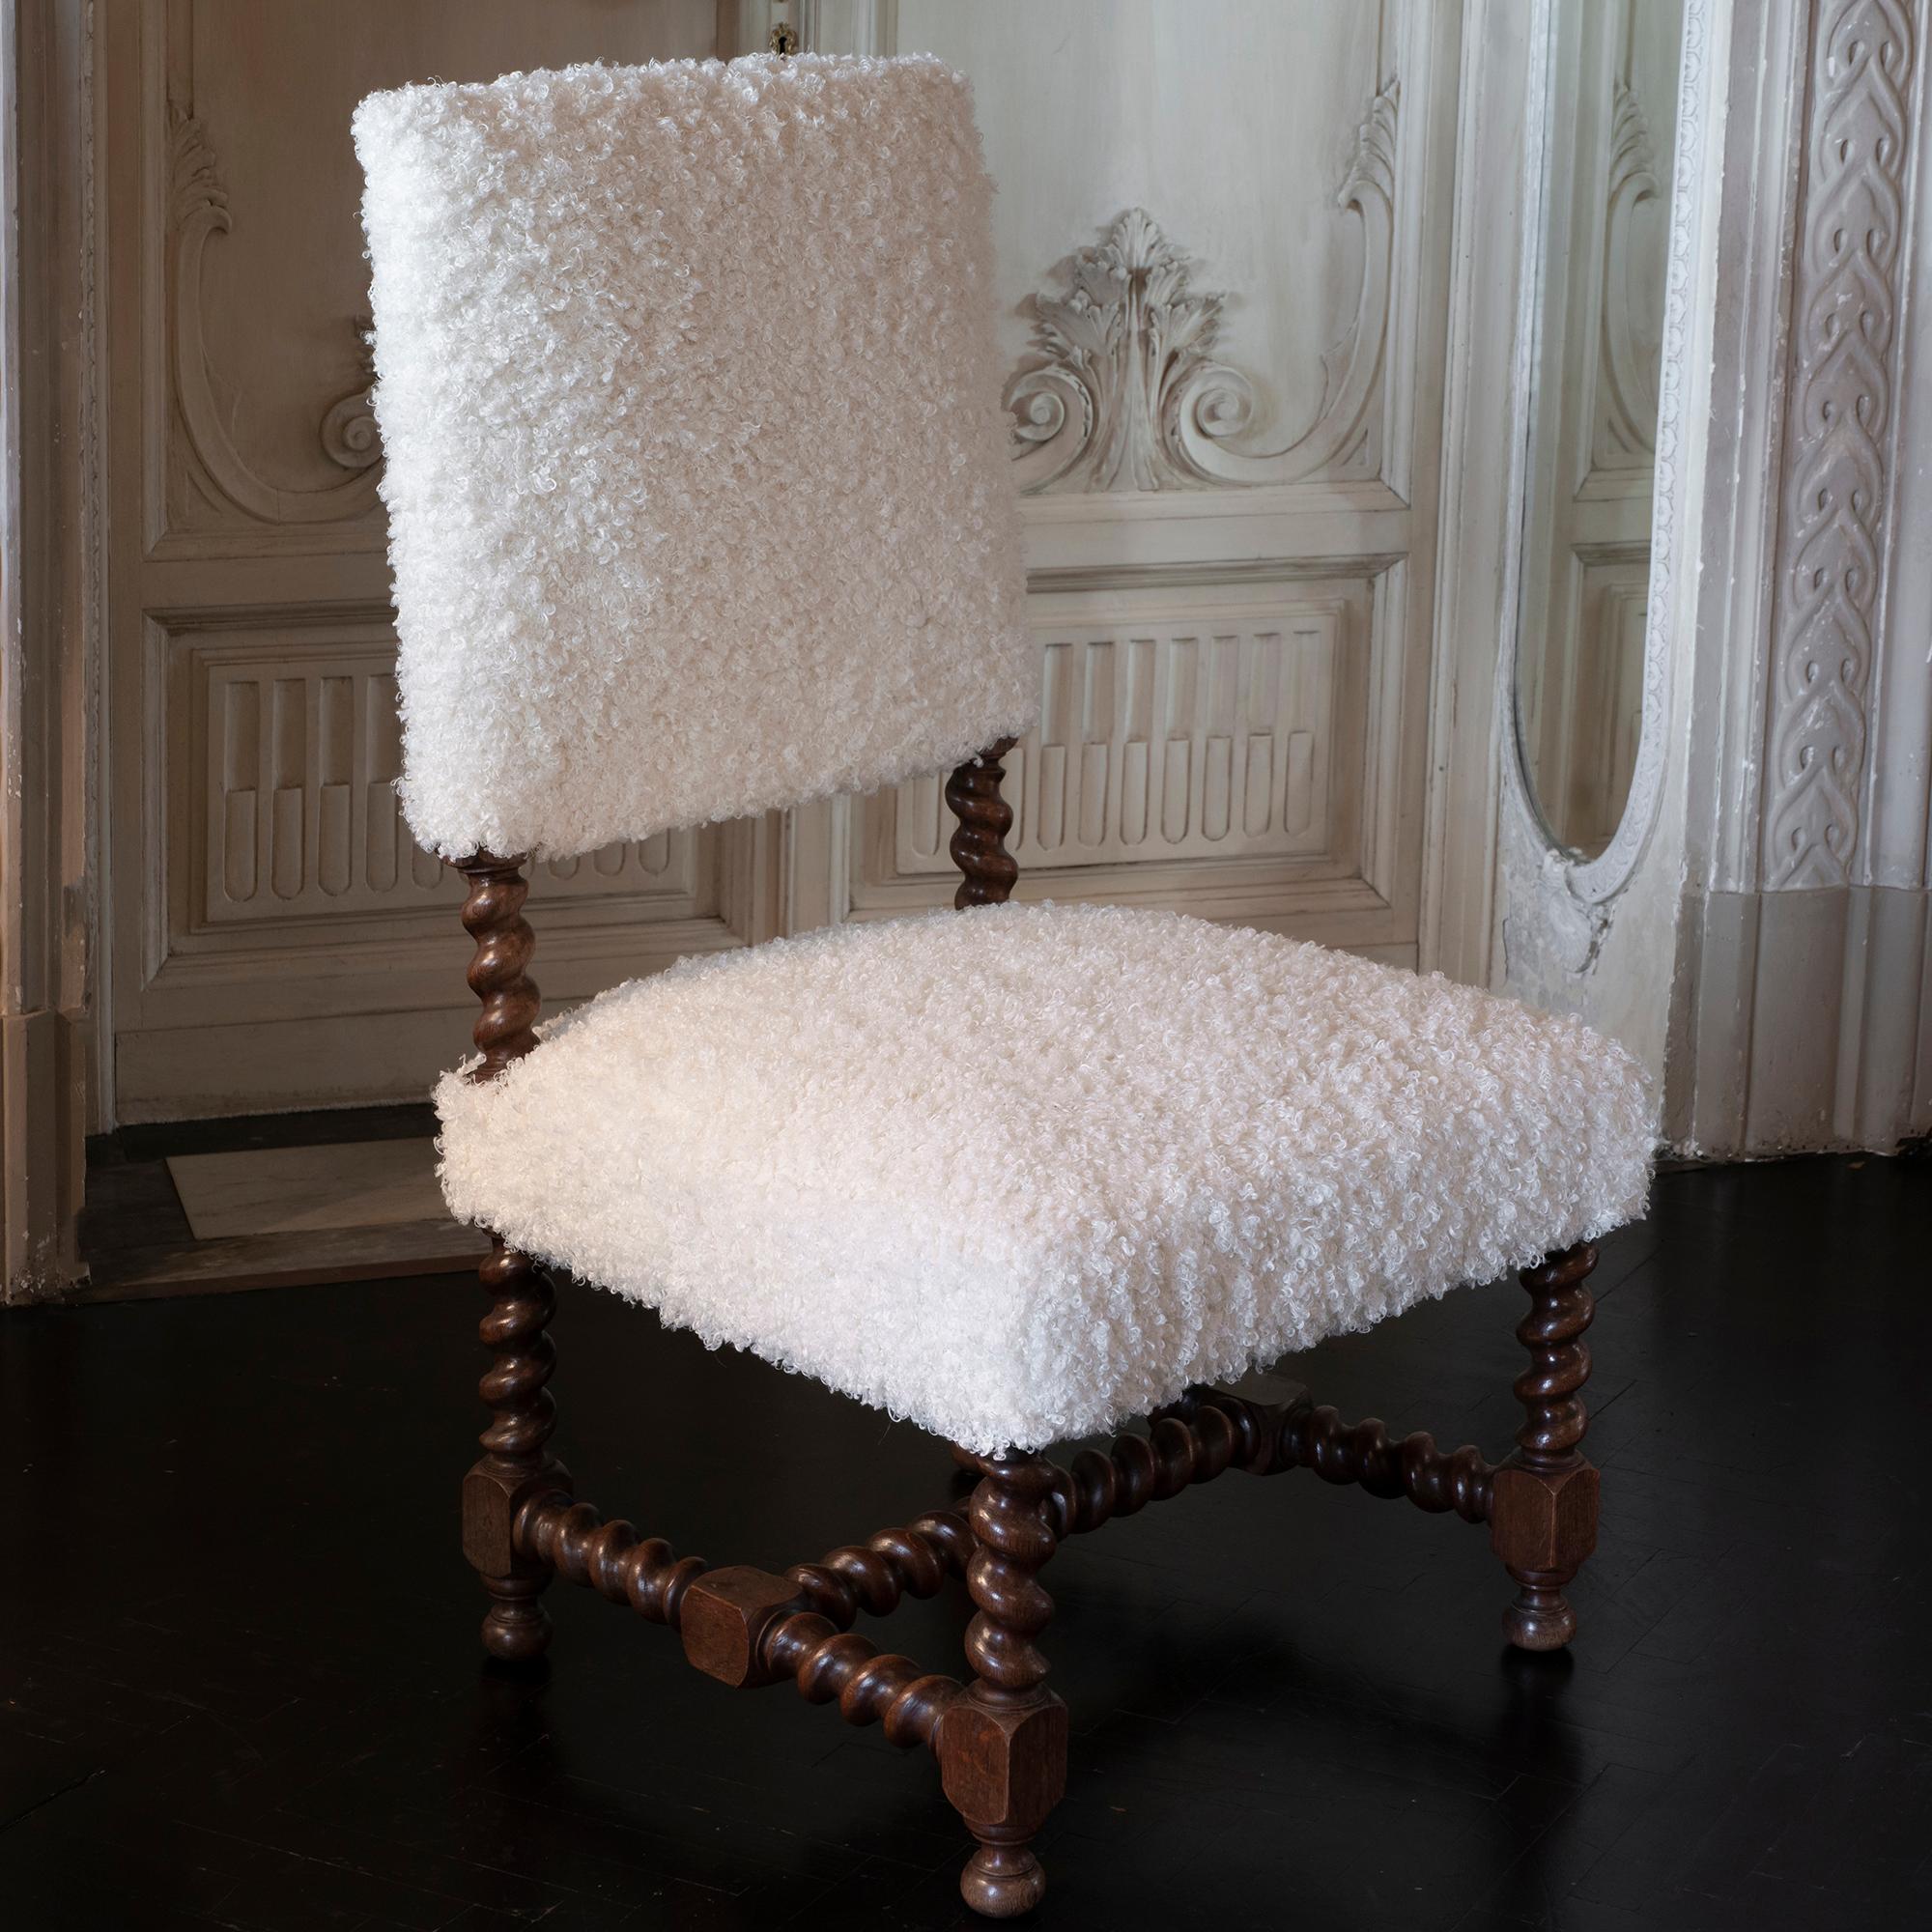 Early 20th century Italian chair, walnut structure with turned legs and perfect vintage patina, newly reupholstered in white curly wool fabric.